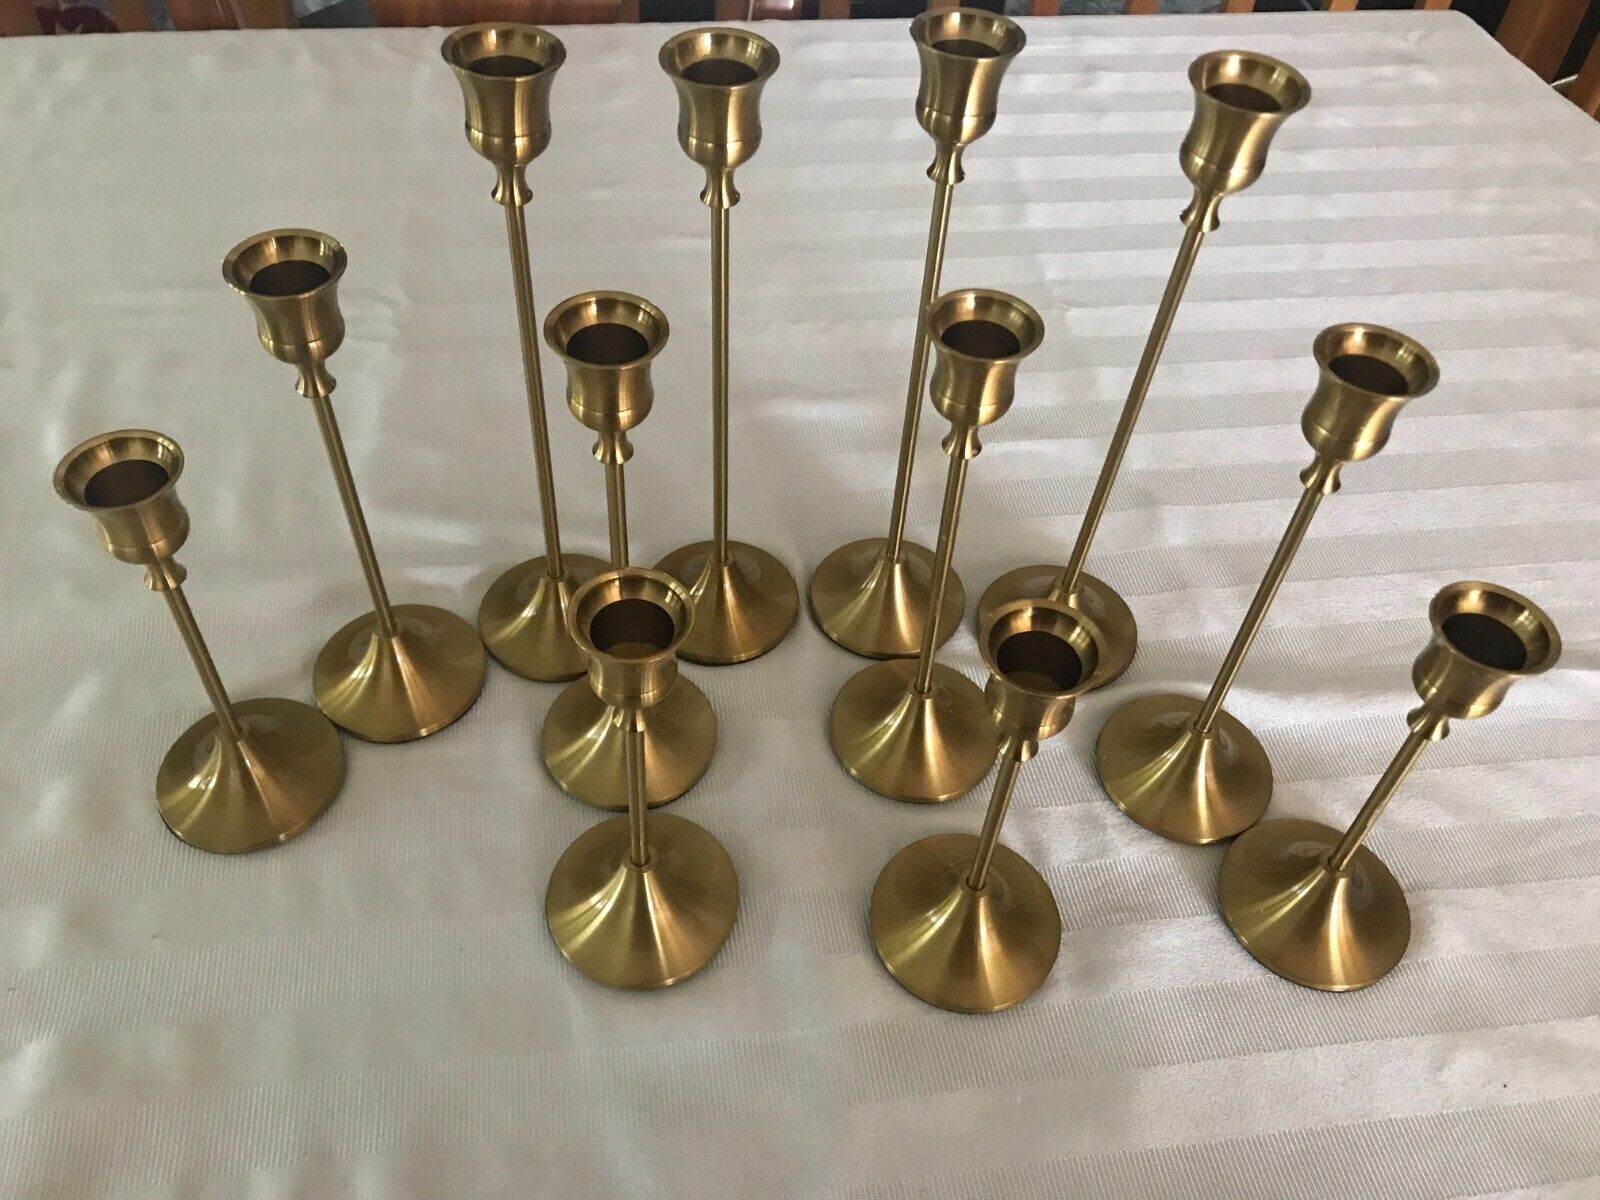 decorative candle stick holders, high quality gold mettle , set of 12 